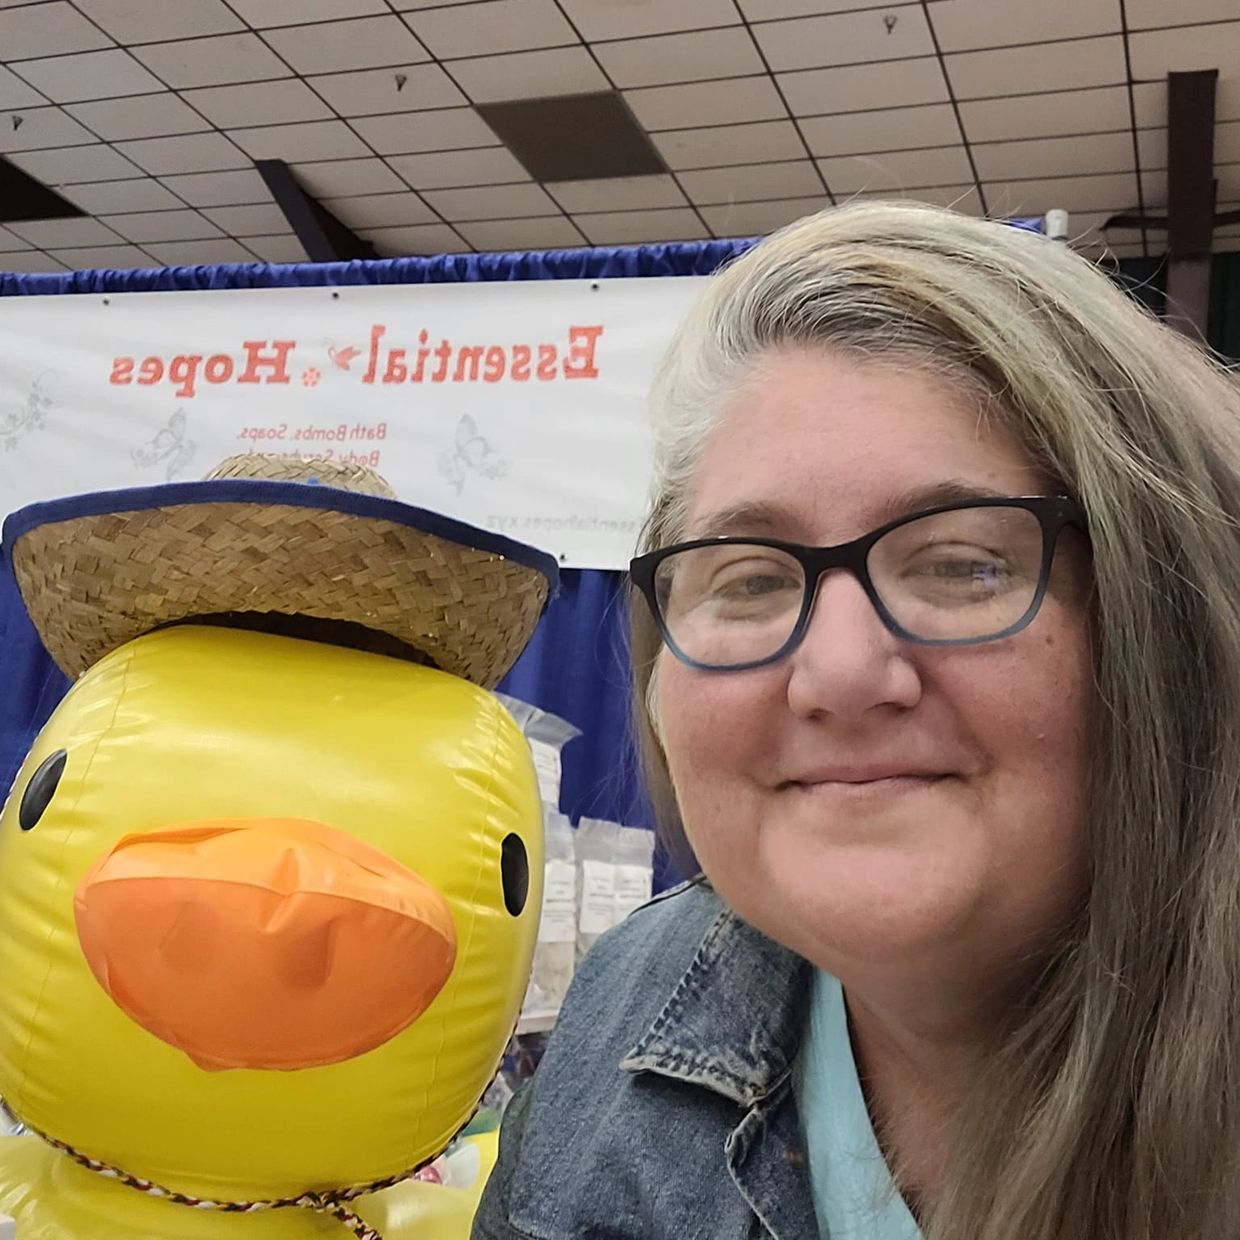 Our mascot Sir Quacks A lot with the owner Kimberly